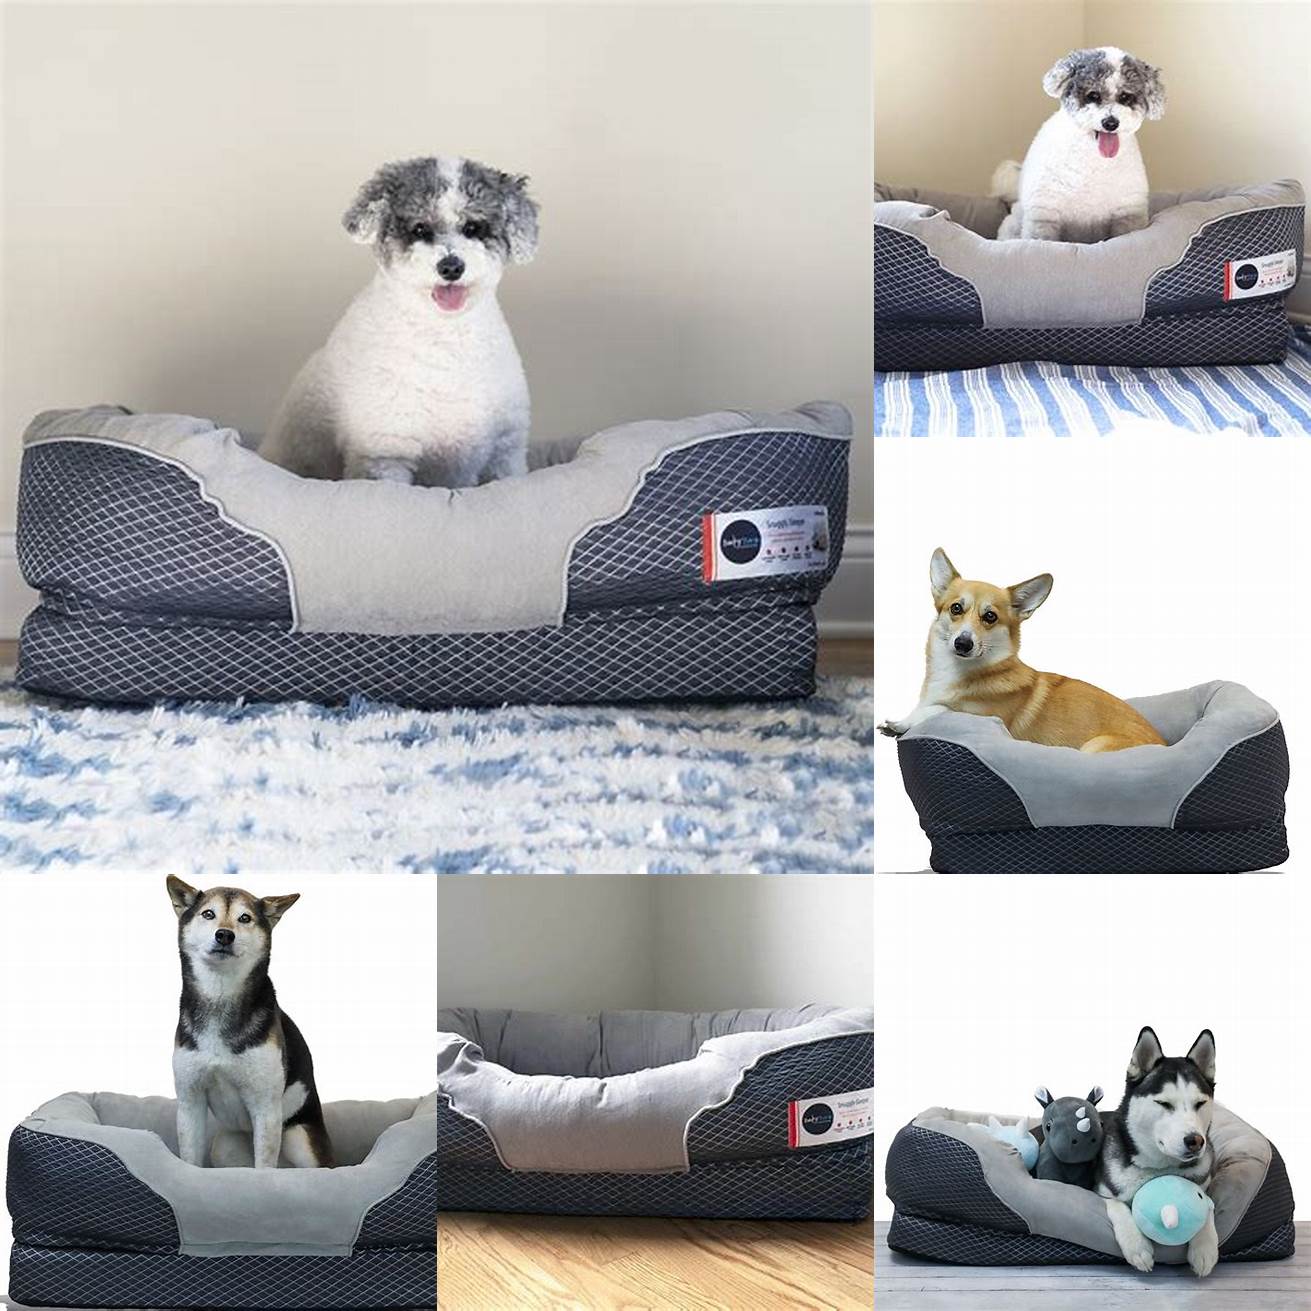 The BarksBar Orthopedic Dog Bed is a great choice for dogs with joint pain or arthritis